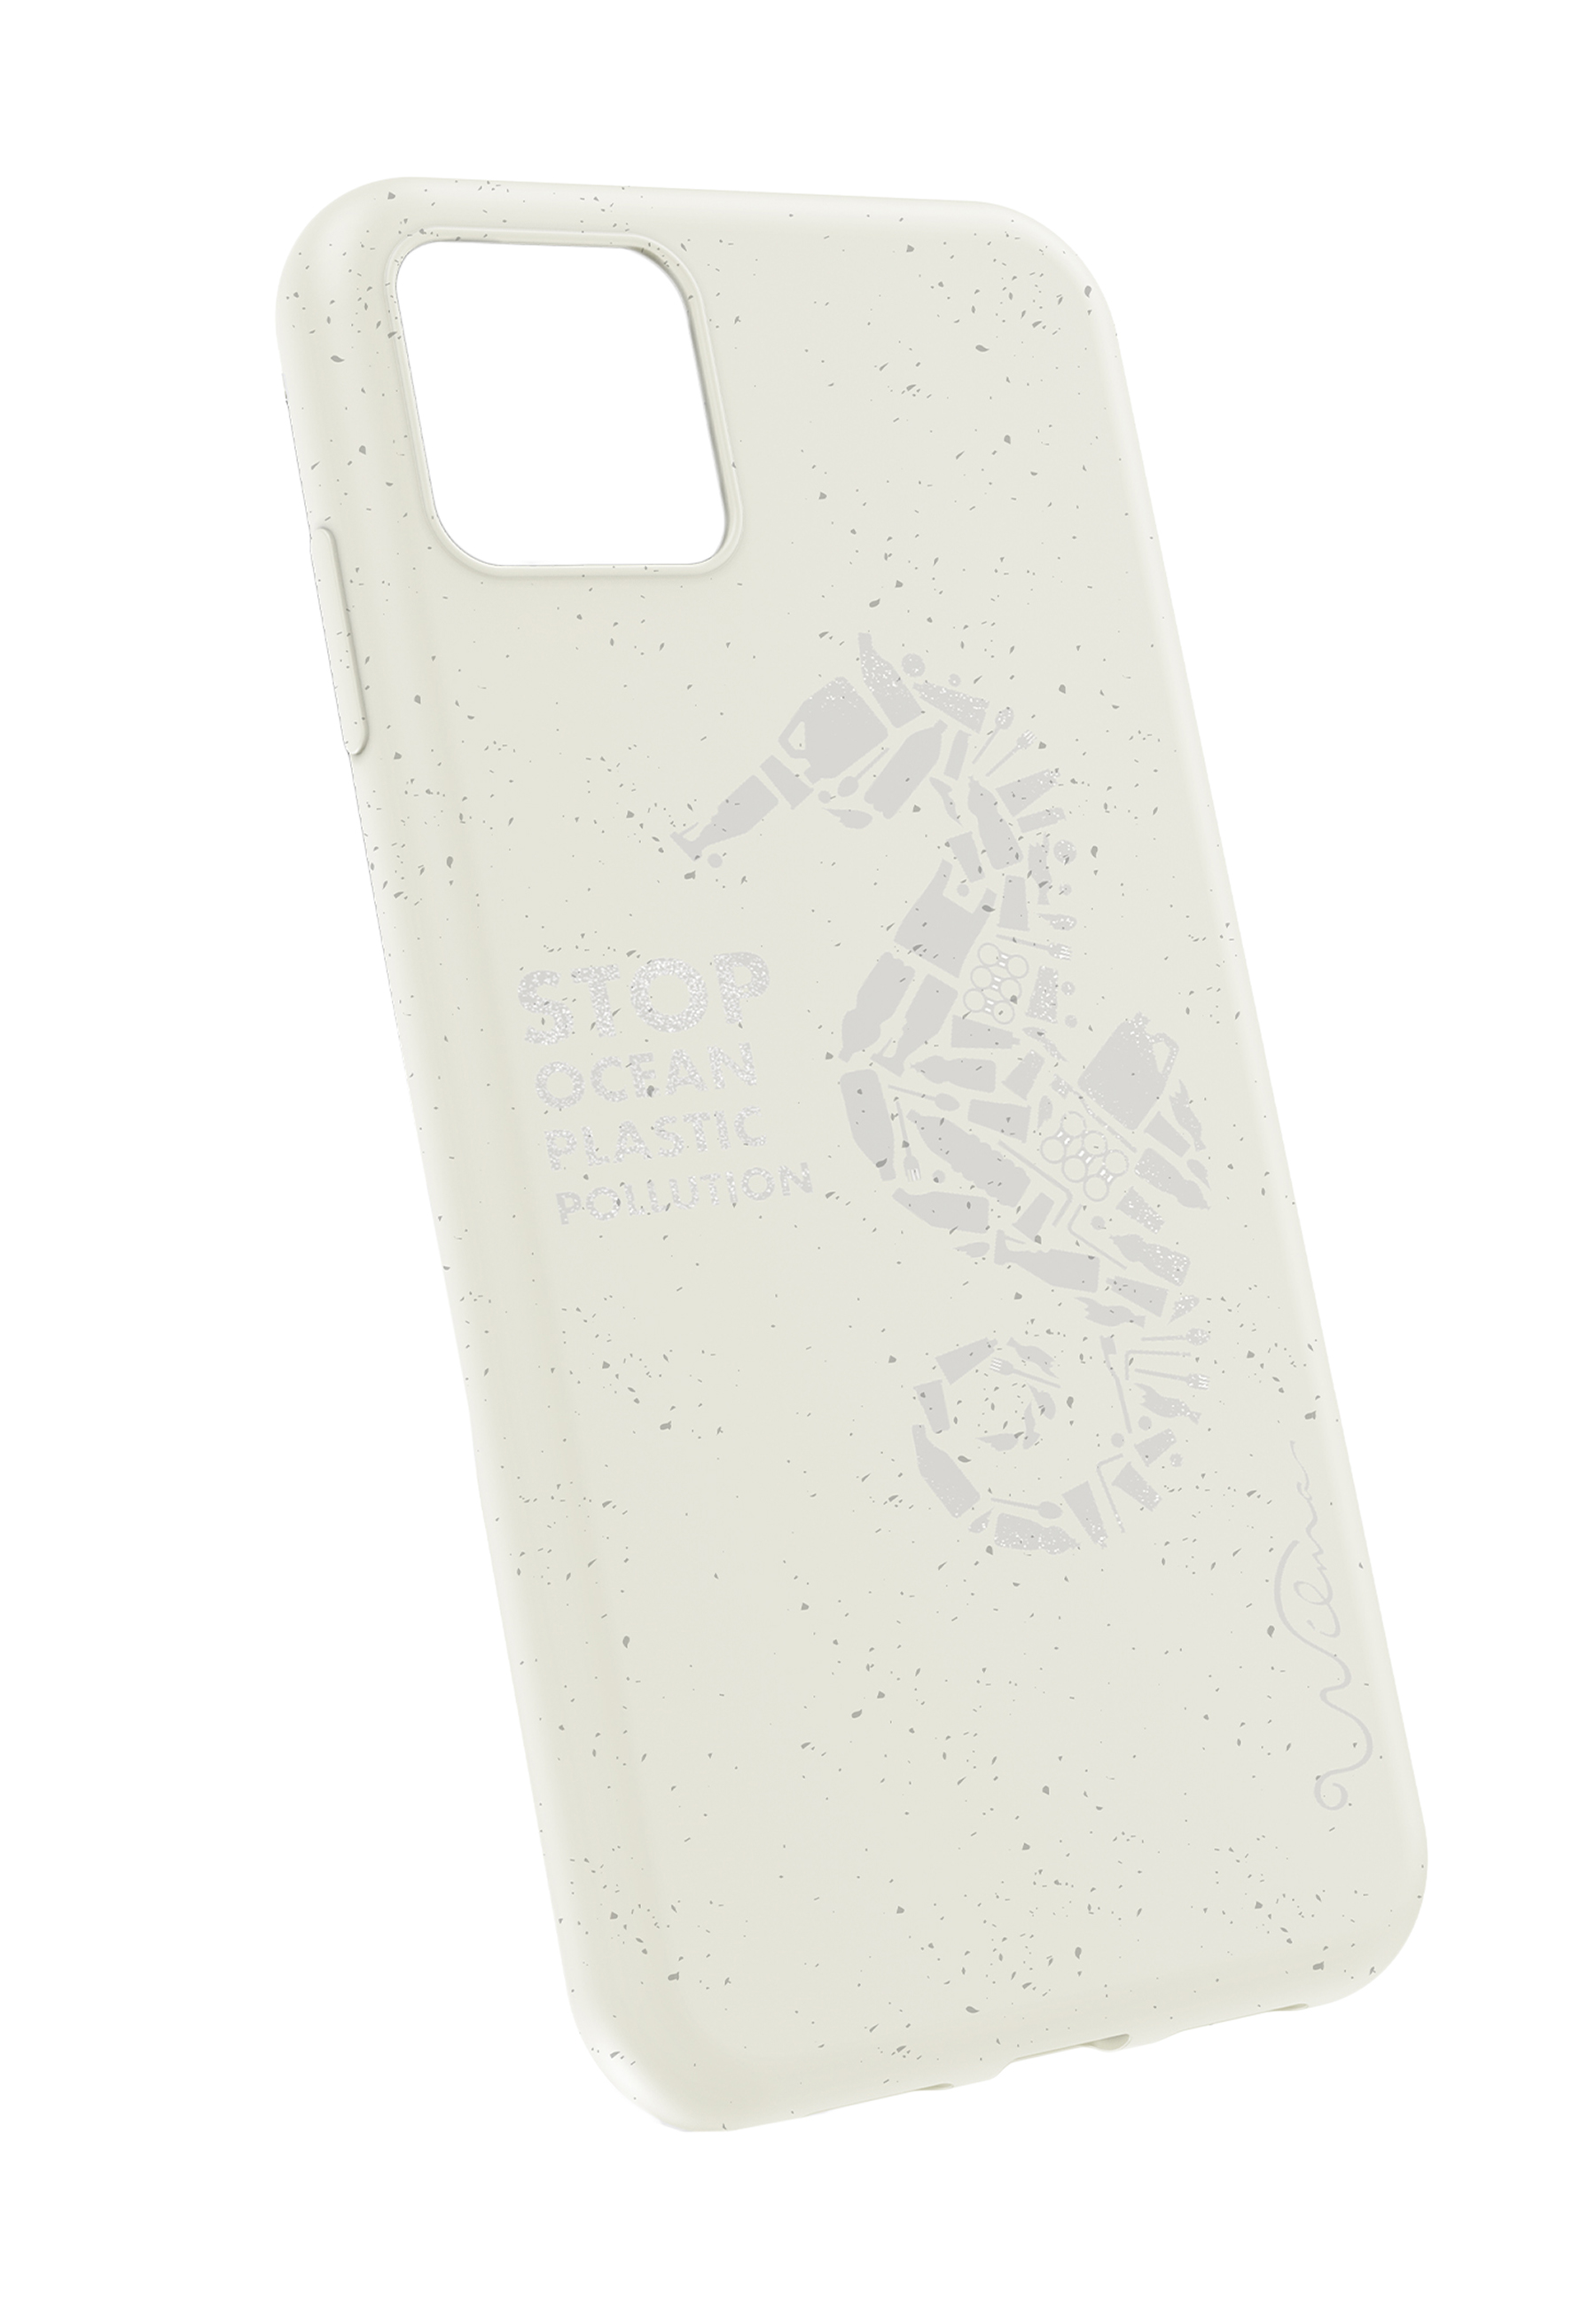 FASHION iPhone Backcover, ECO PRO, 11 WILMA BY RIP11, Apple, white